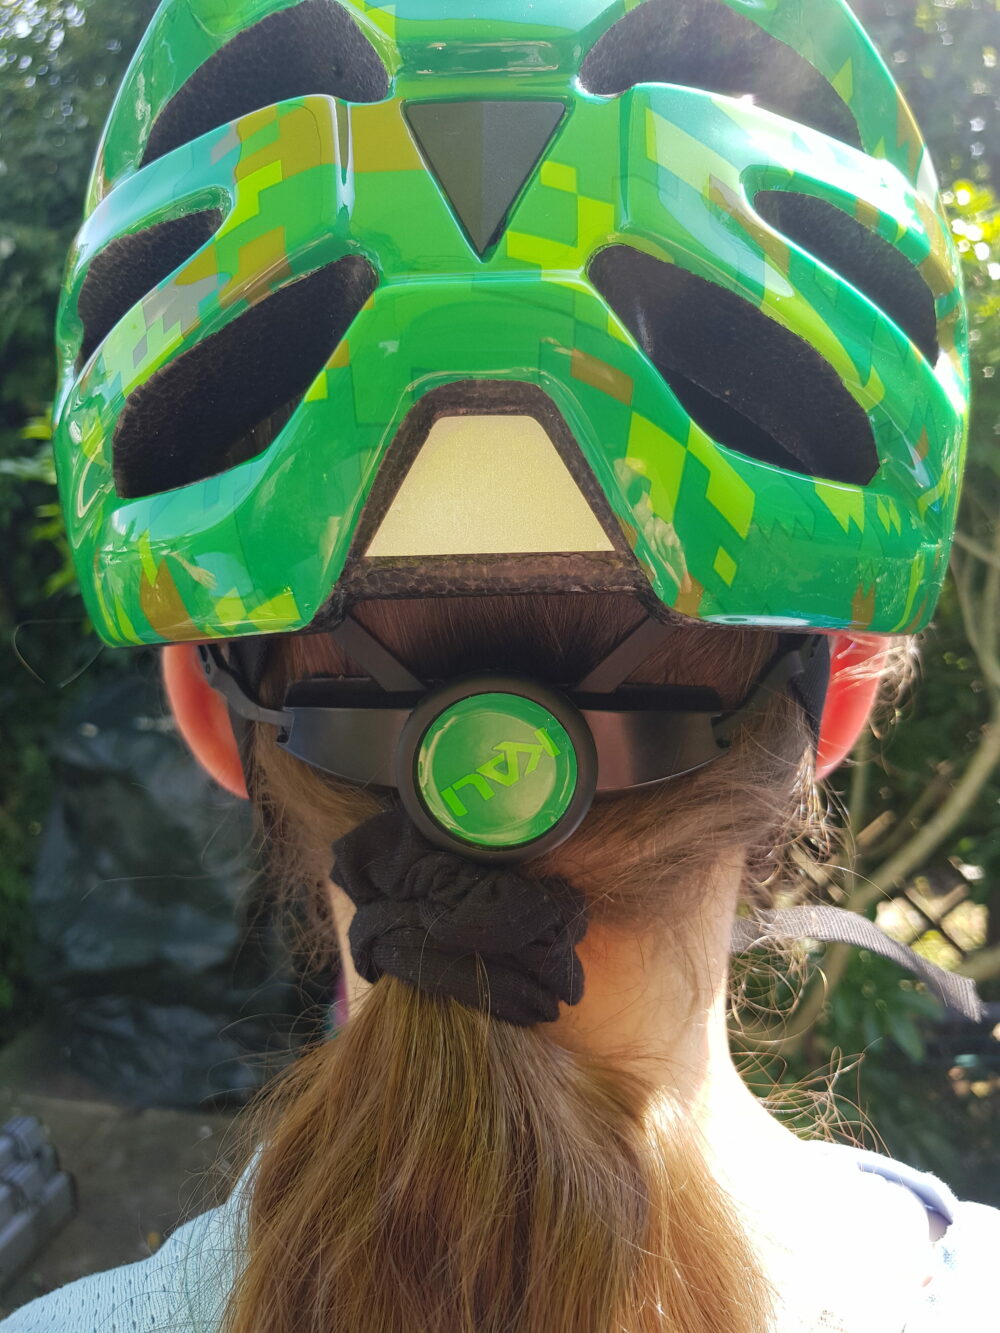 Kali Chakra kids cycle helmet with ponytail - showing the mechanism very close to the ponytail hair band